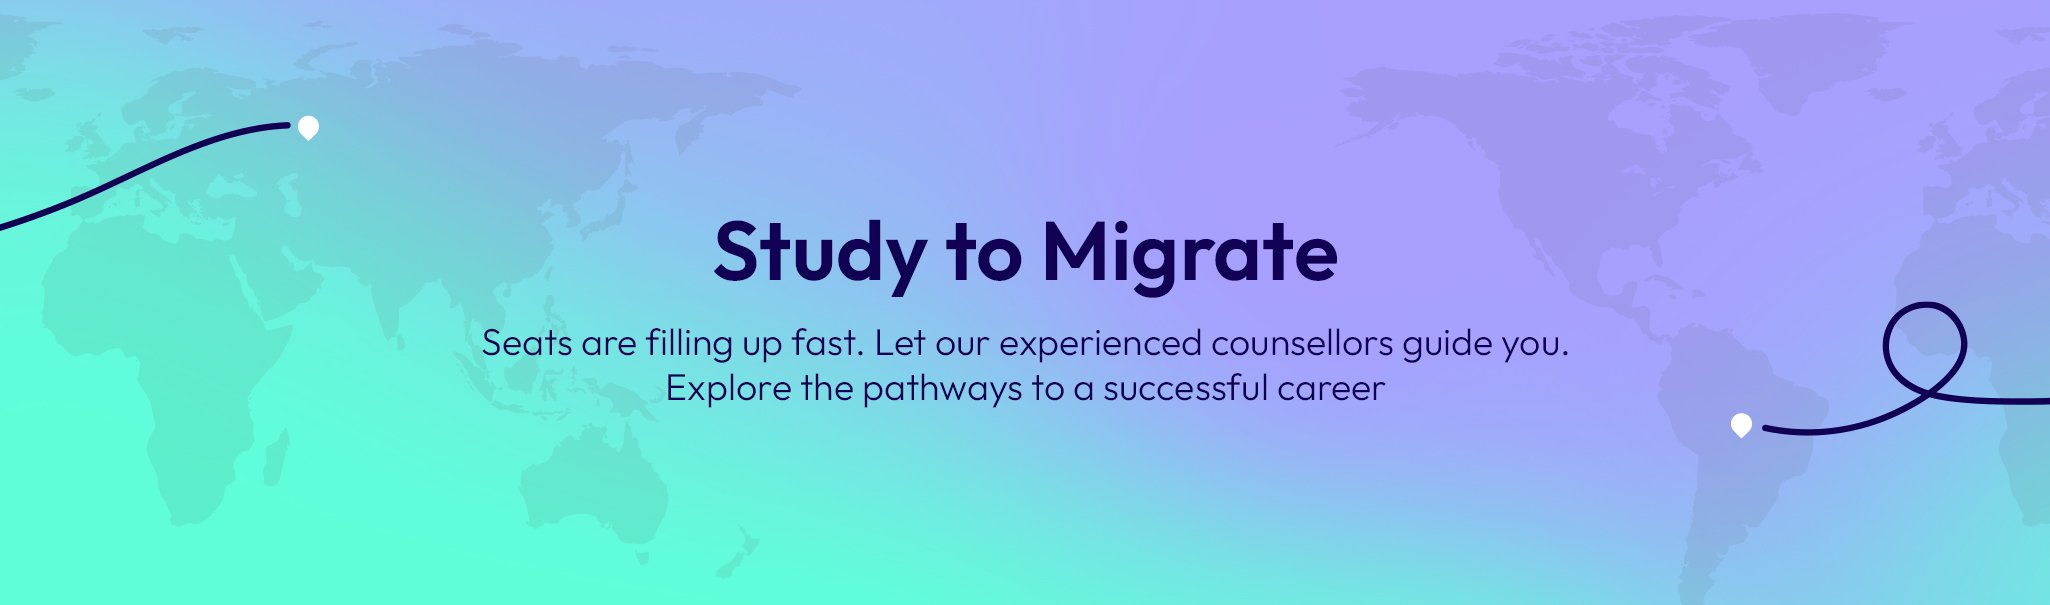 study-to-migrate1-1 Study to Migrate